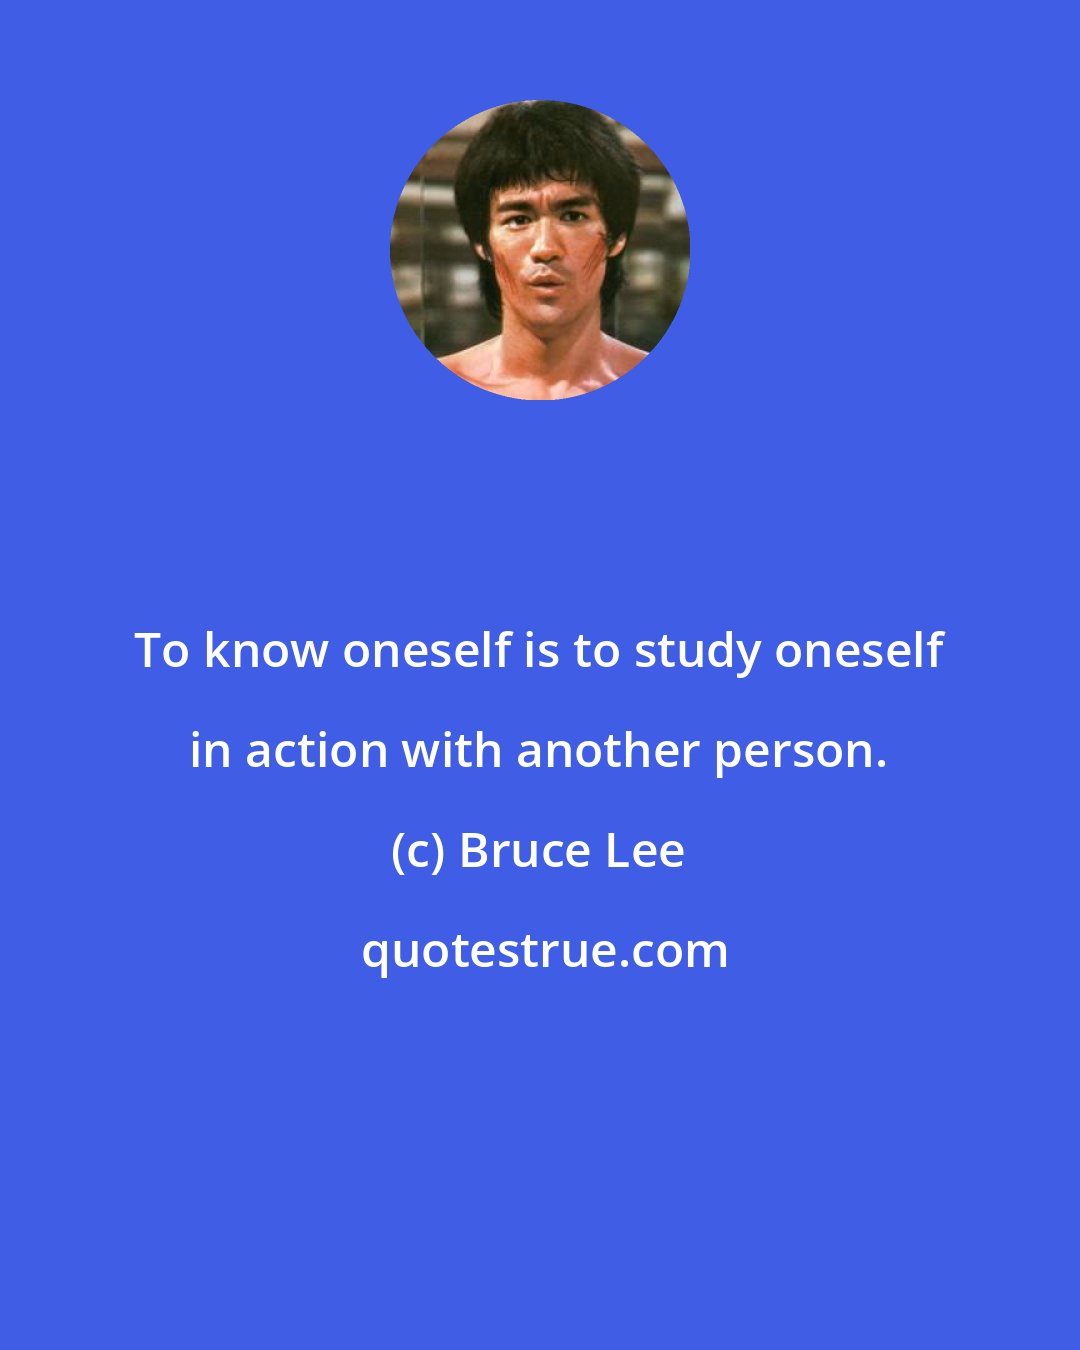 Bruce Lee: To know oneself is to study oneself in action with another person.